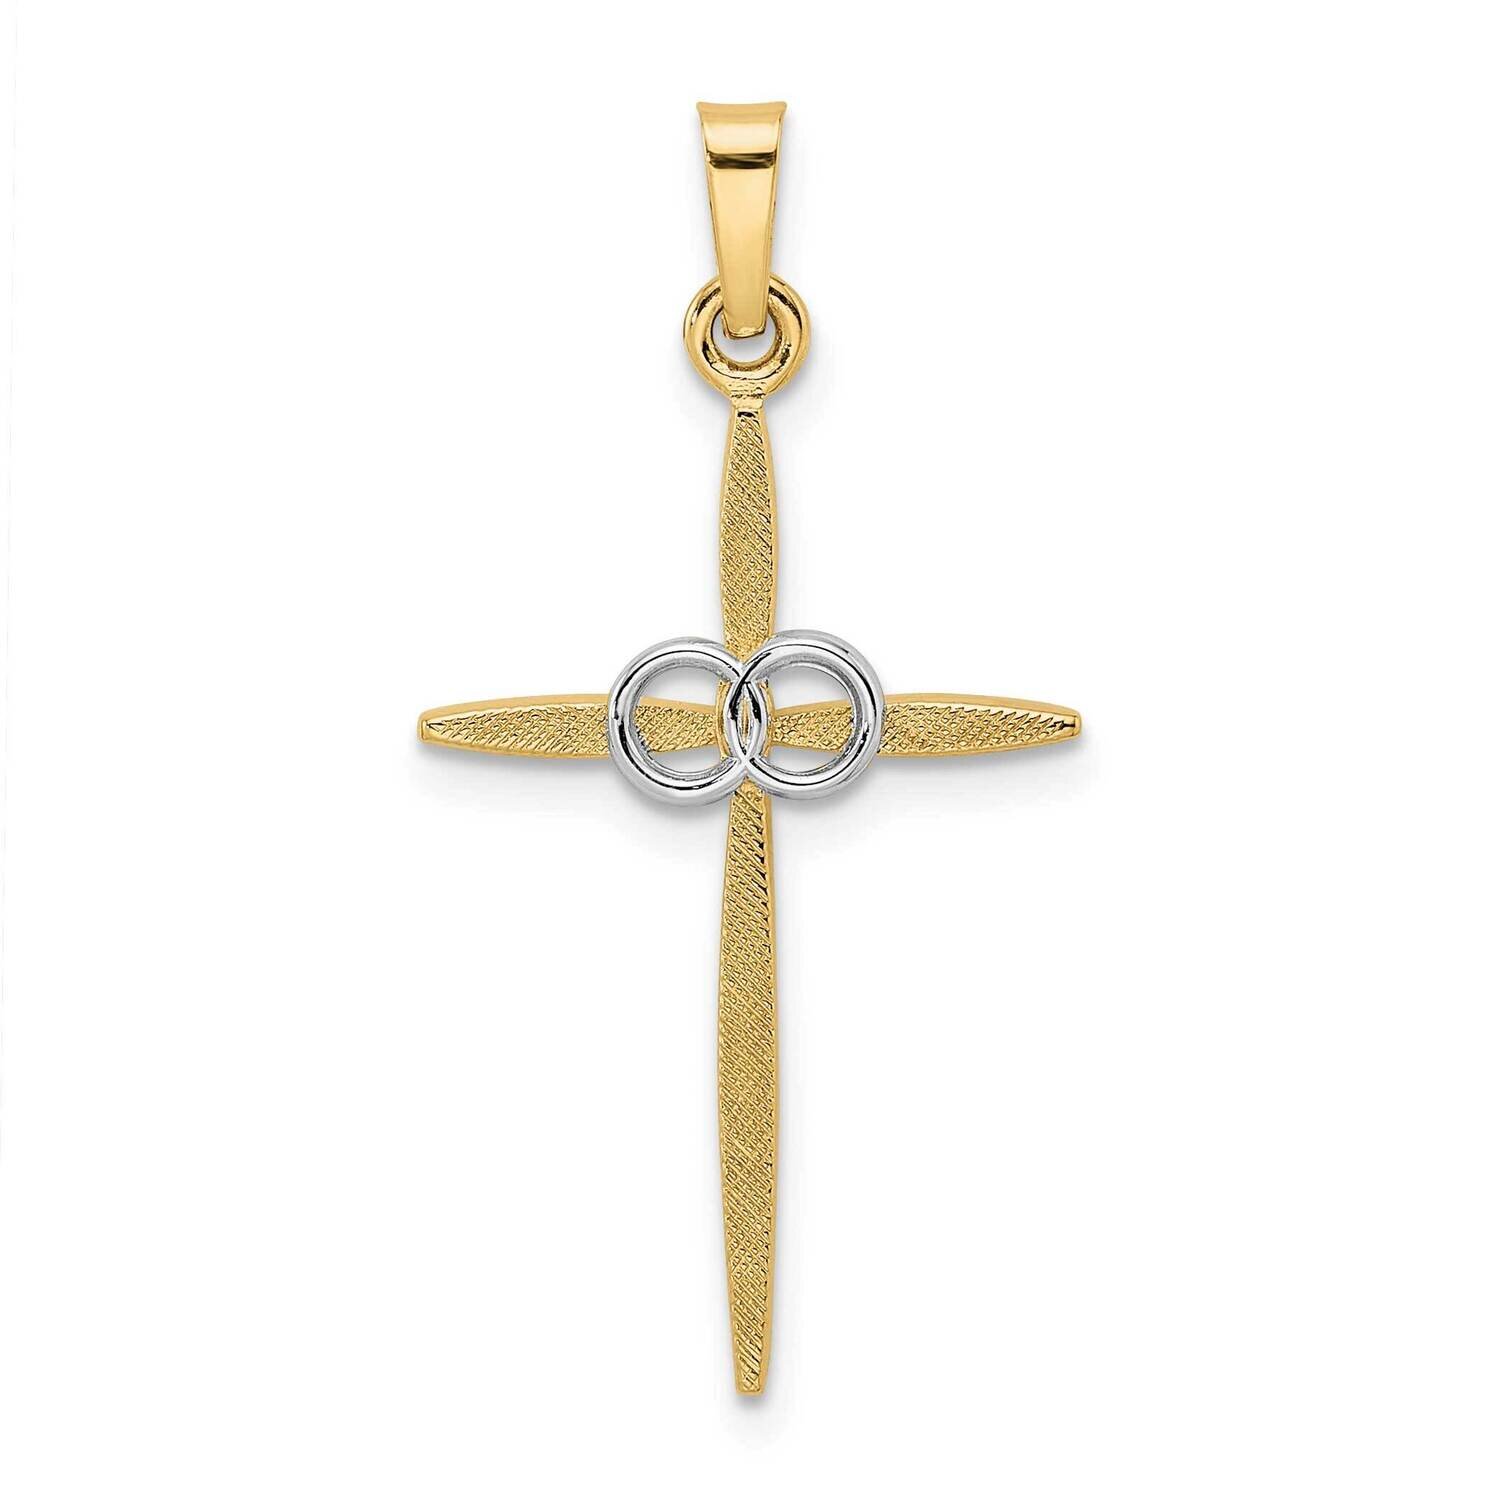 Satin Solid Double Ring Cross Pendant 14k Two-Tone Gold Polished XR2002